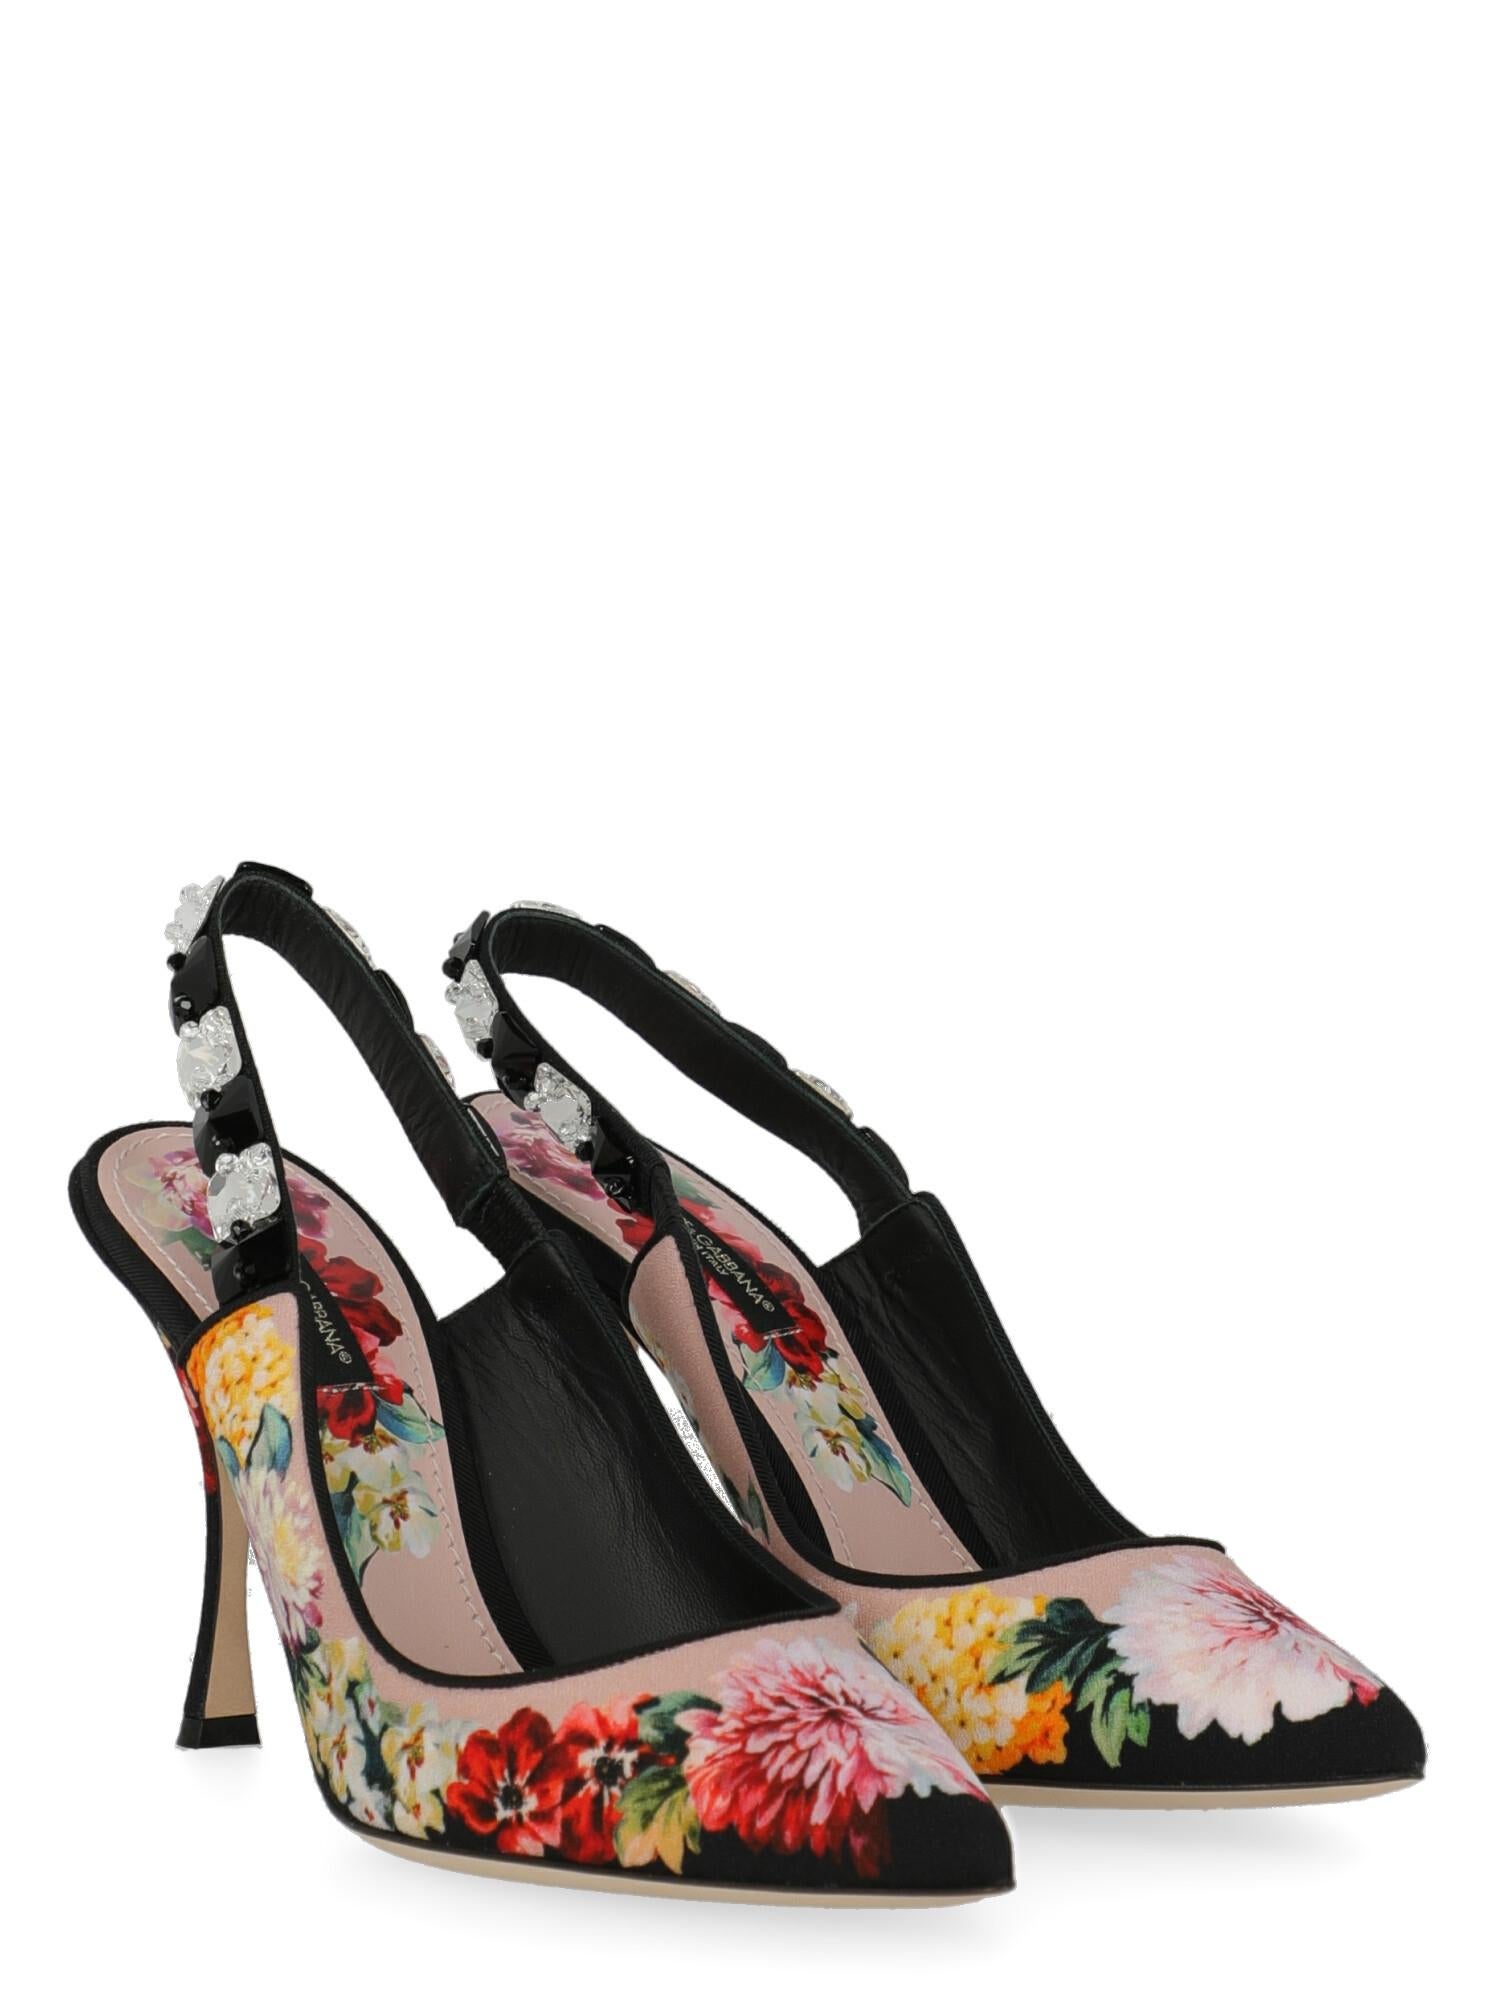 Shoe, fabric, floral print, elasticated slingback fastening, pointed toe, branded insole, branded sole, tapered heel, high heel, crystal embellishment.

Includes:
- Box
- Dust bag

Product Condition: New With Tag

Measurements:
Heel Height: 10